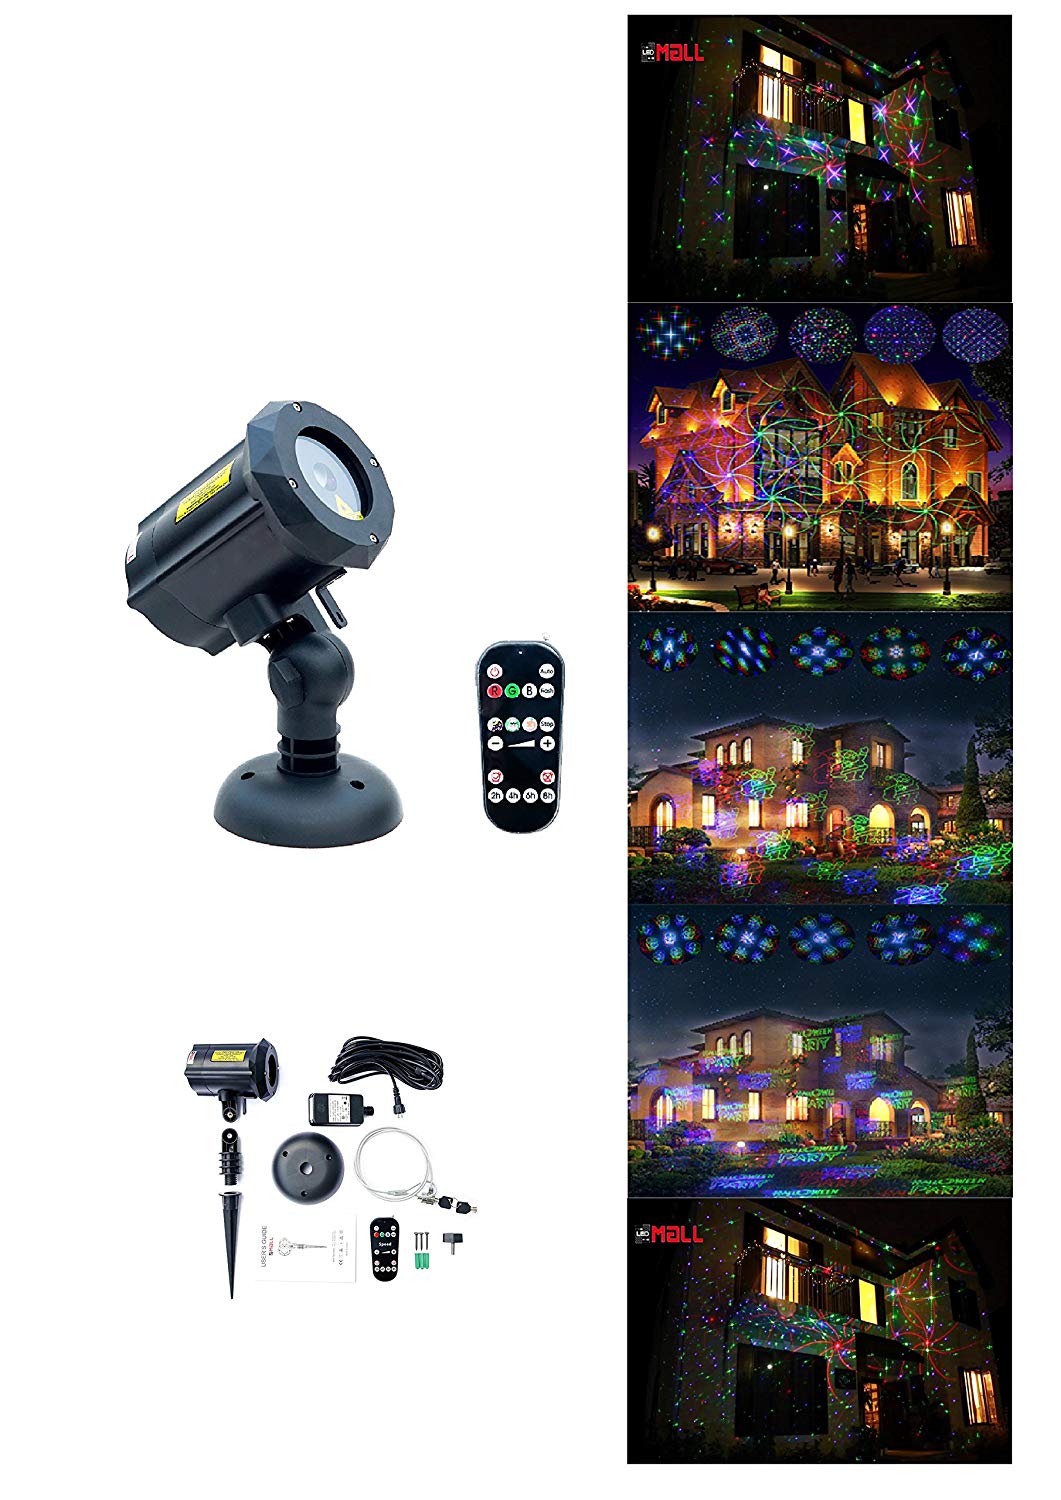 Motion Pattern Firefly 3 models in 1 Continuous 18 Patterns LEDMALL RGB Outdoor Laser Garden and Christmas Lights 